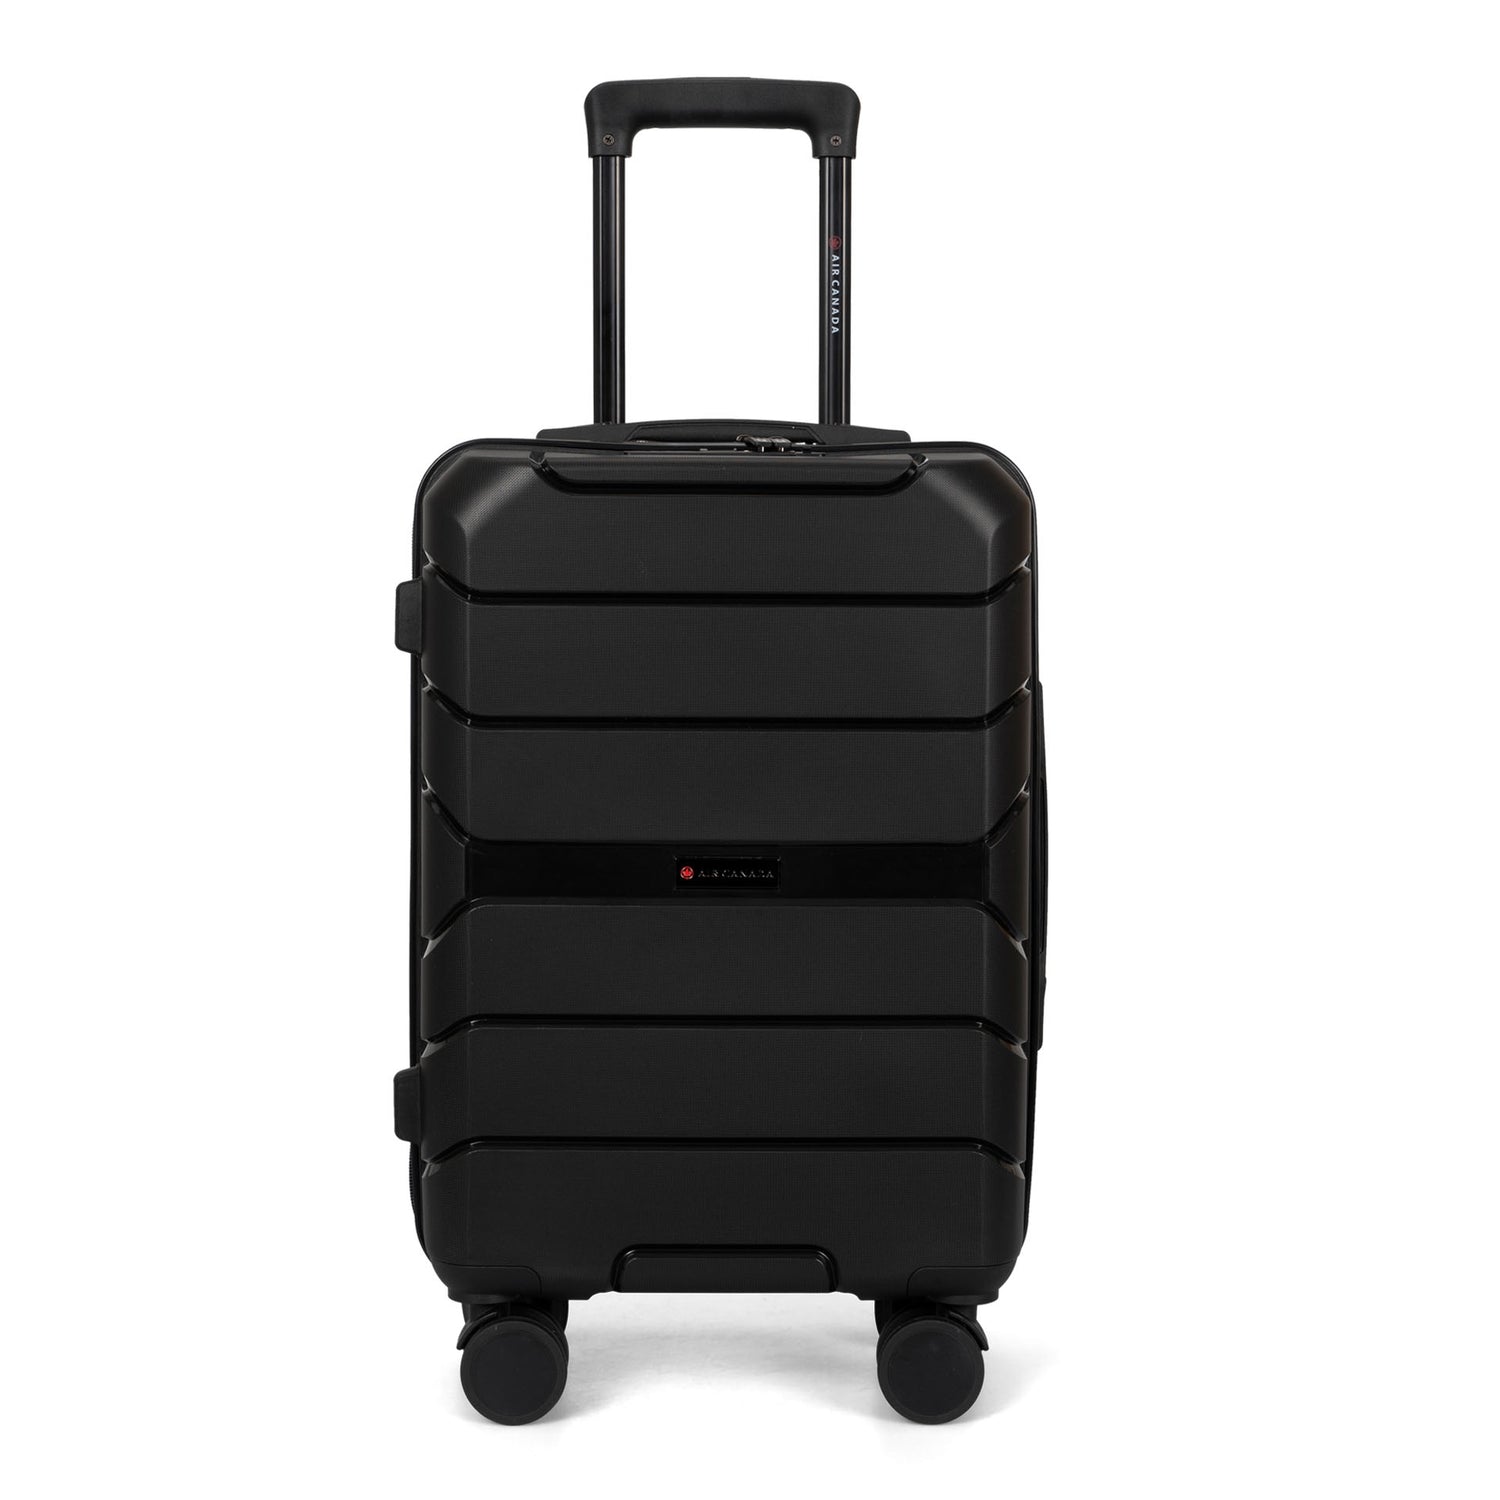 Front side view of a black hard side luggage called Altitude designed by Air Canada sold at Bentley, showcasing its telescopic handle and resistant shell texture.